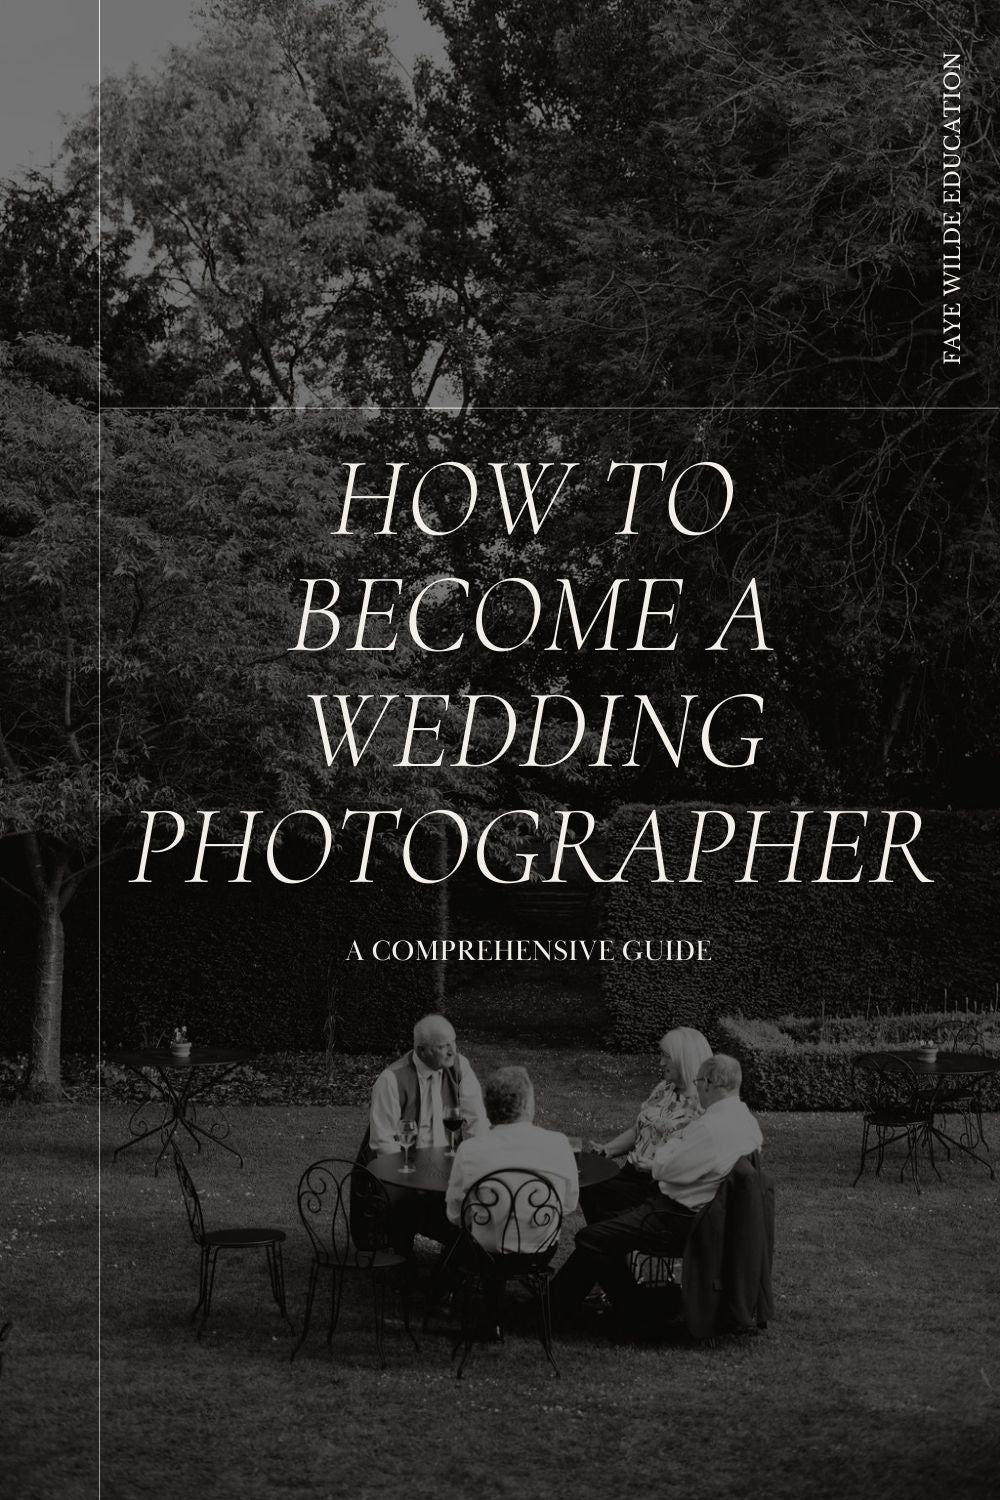 How to become a wedding photographer - The ultimate guide